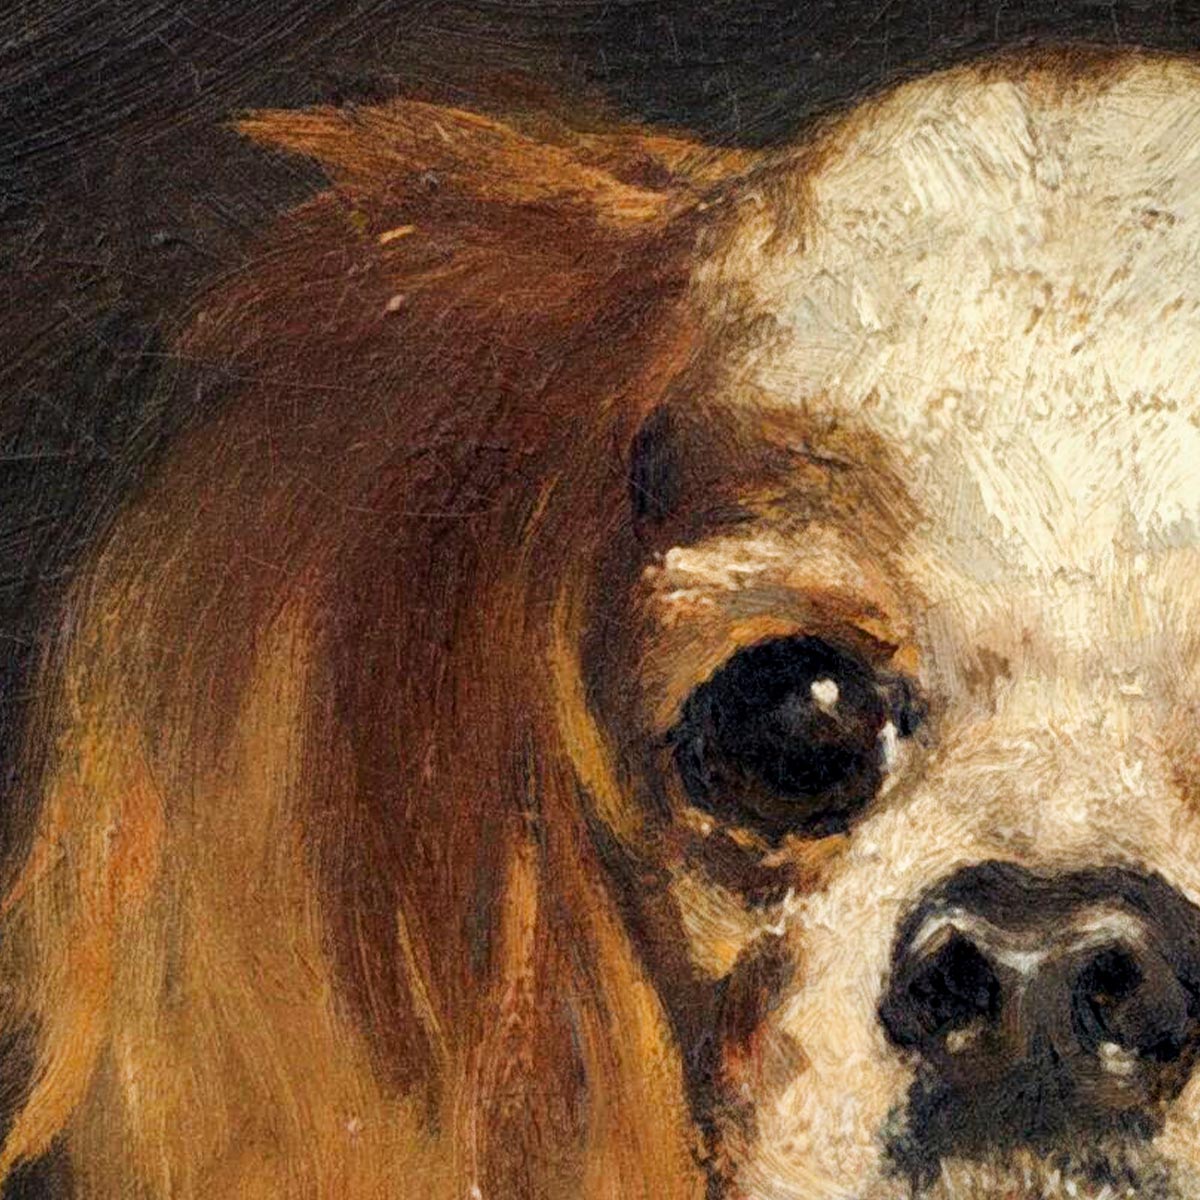 A King Charles Spaniel by Manet Exhibition Poster